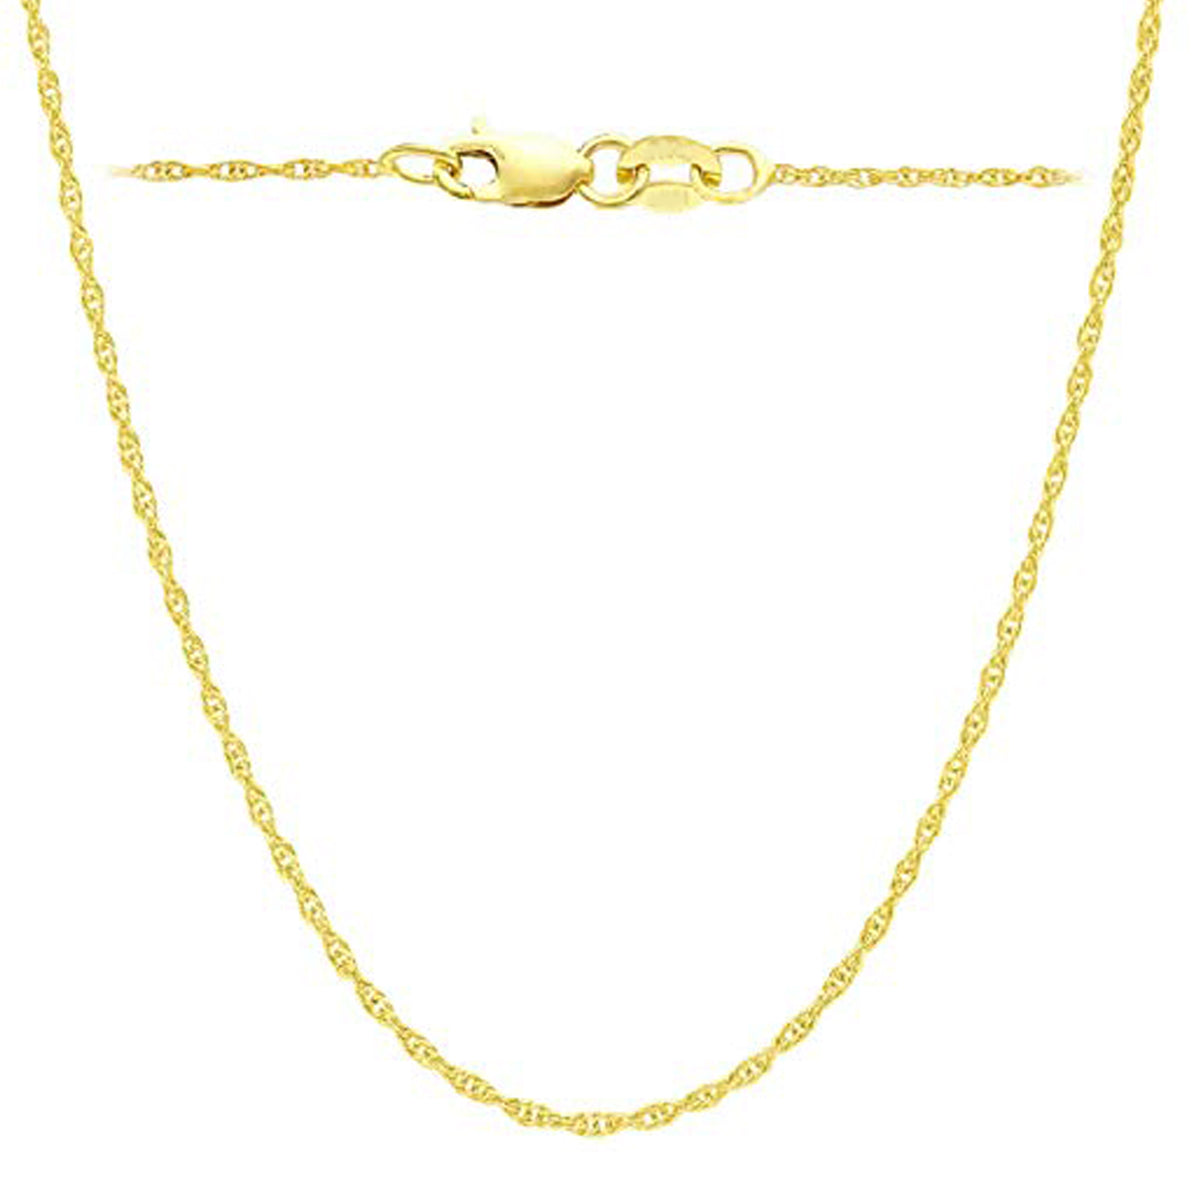 14k Yellow Gold Rope Chain Necklace, 0.8mm, 18" fine designer jewelry for men and women